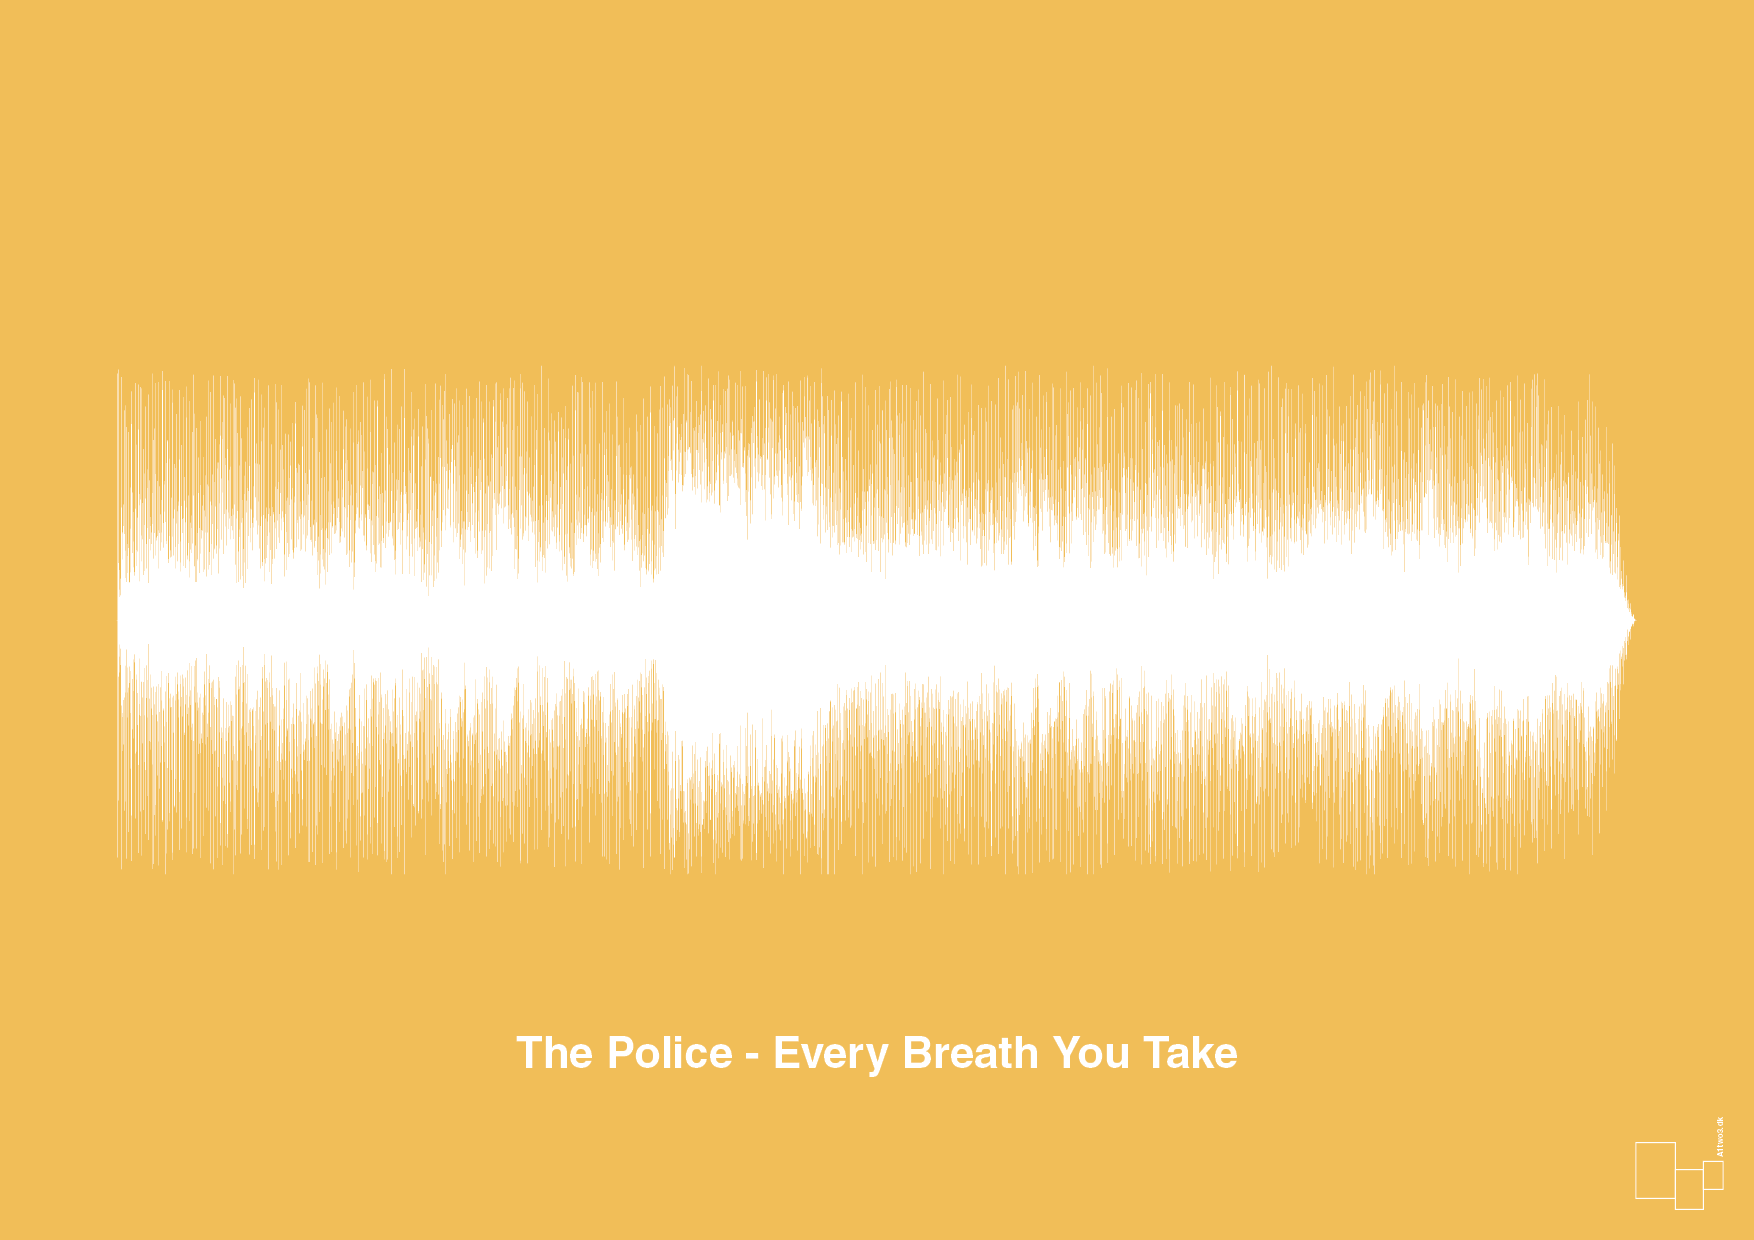 the police - every breath you take - Plakat med Musik i Honeycomb